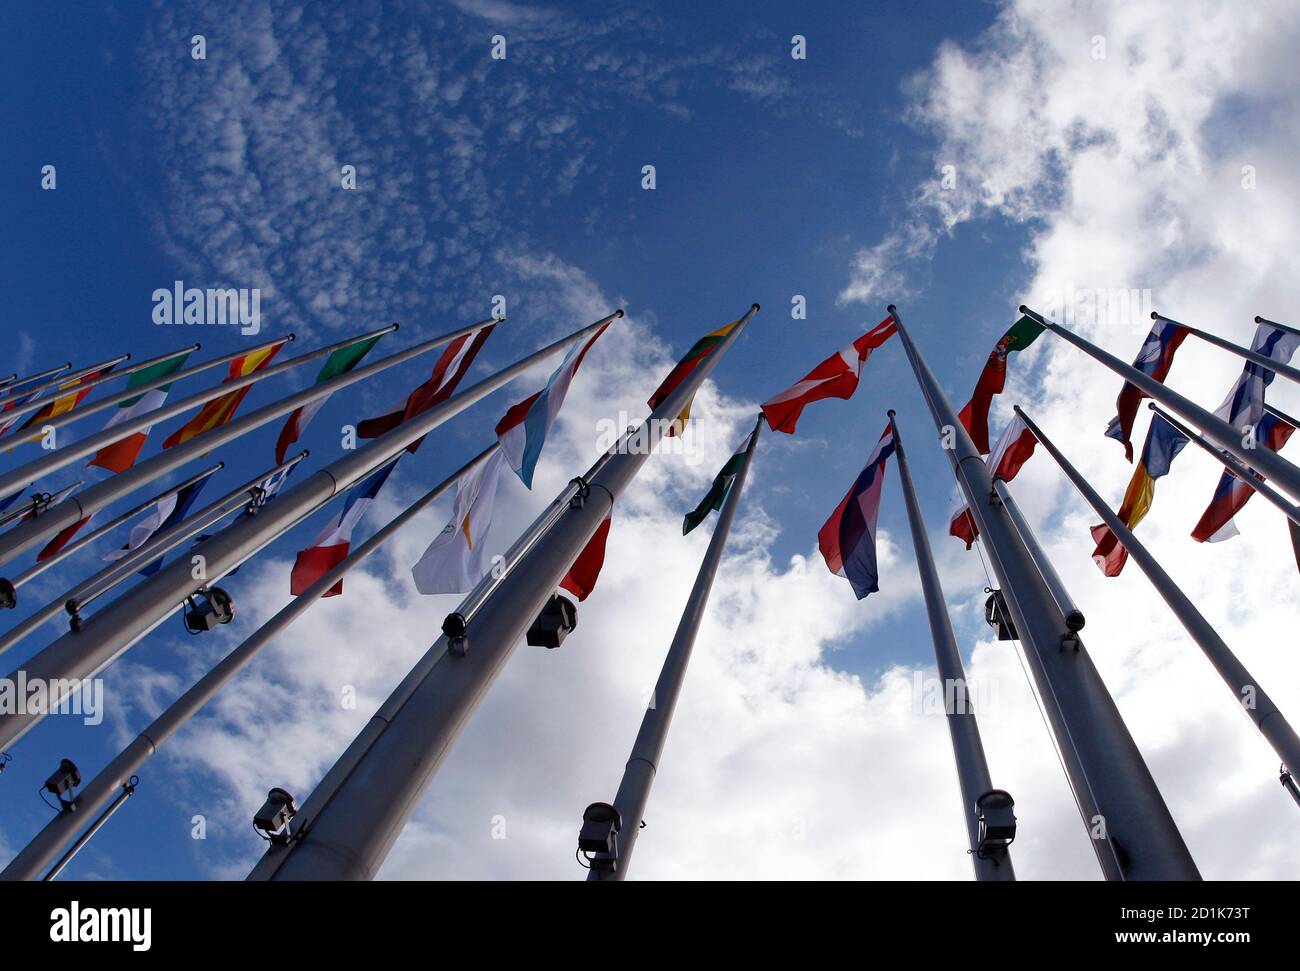 Flags of European Union member states fly in front of the European Parliament building in Strasbourg July 13, 2009, on the eve of the election of its new president. REUTERS/Vincent Kessler  (FRANCE POLITICS) Banque D'Images